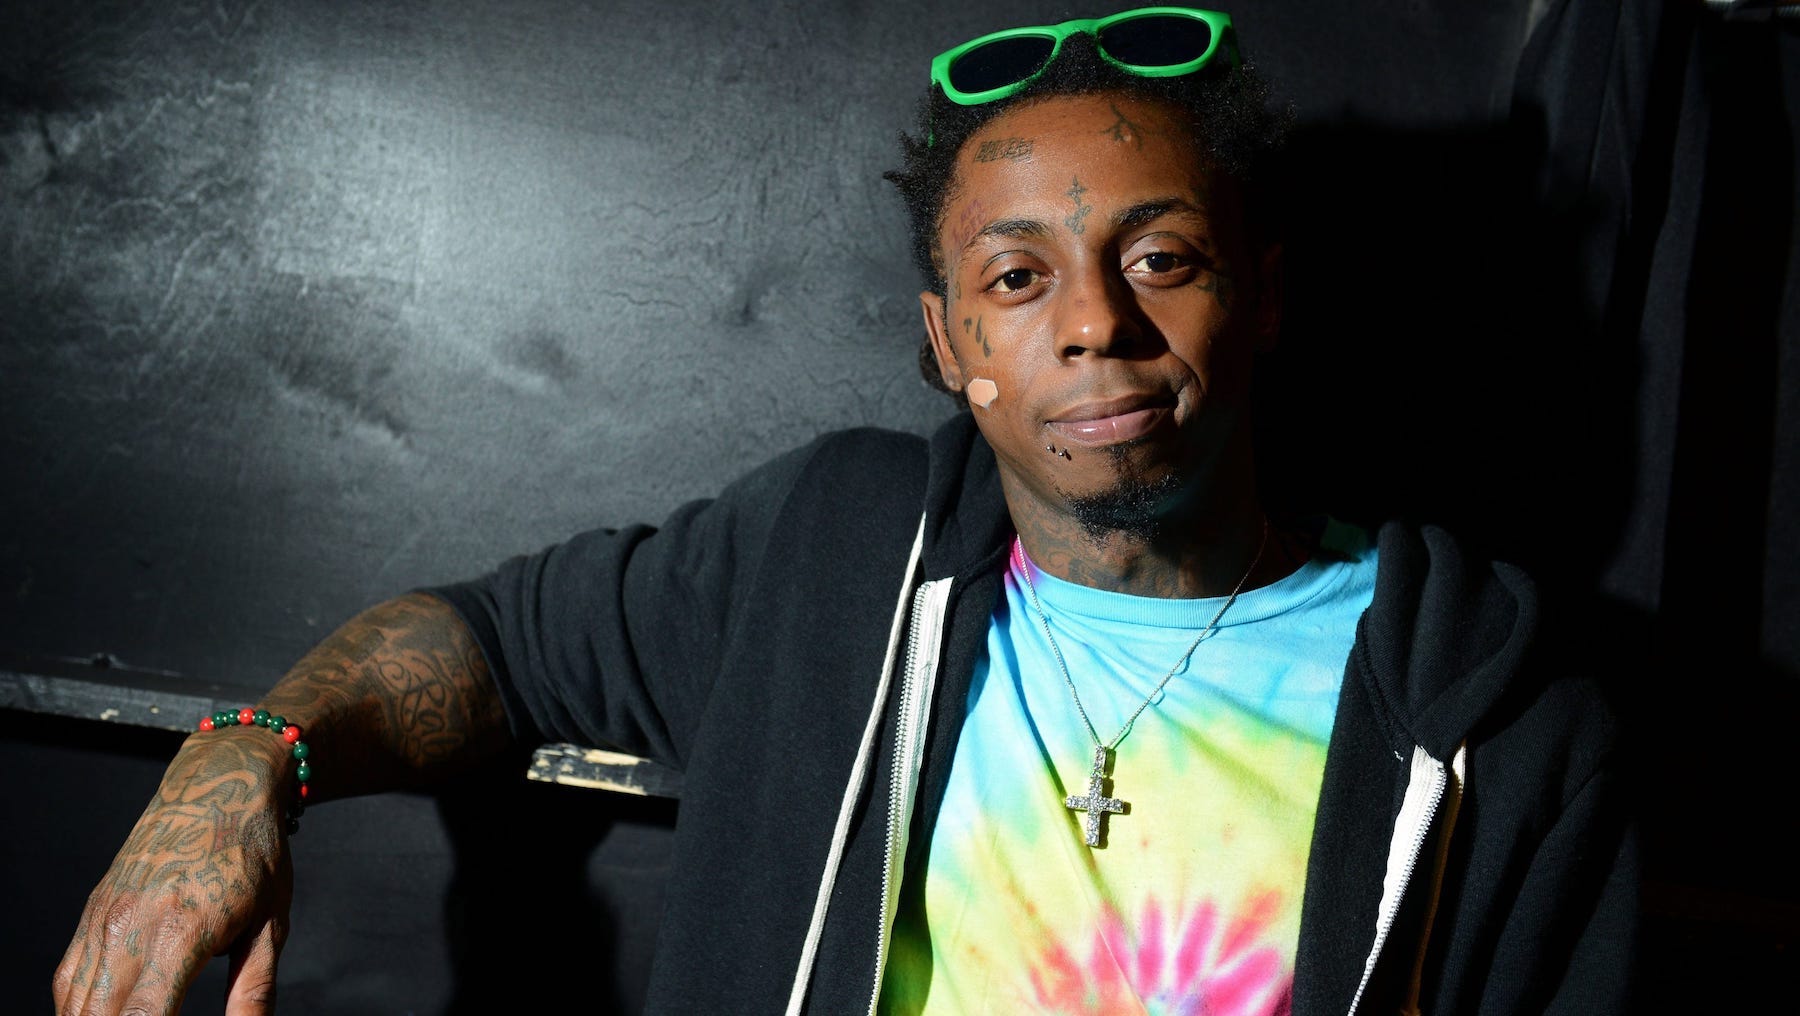 Lil Wayne was officially pardonded before Trump's presidential term ended. What does this mean for the rapper's net worth?